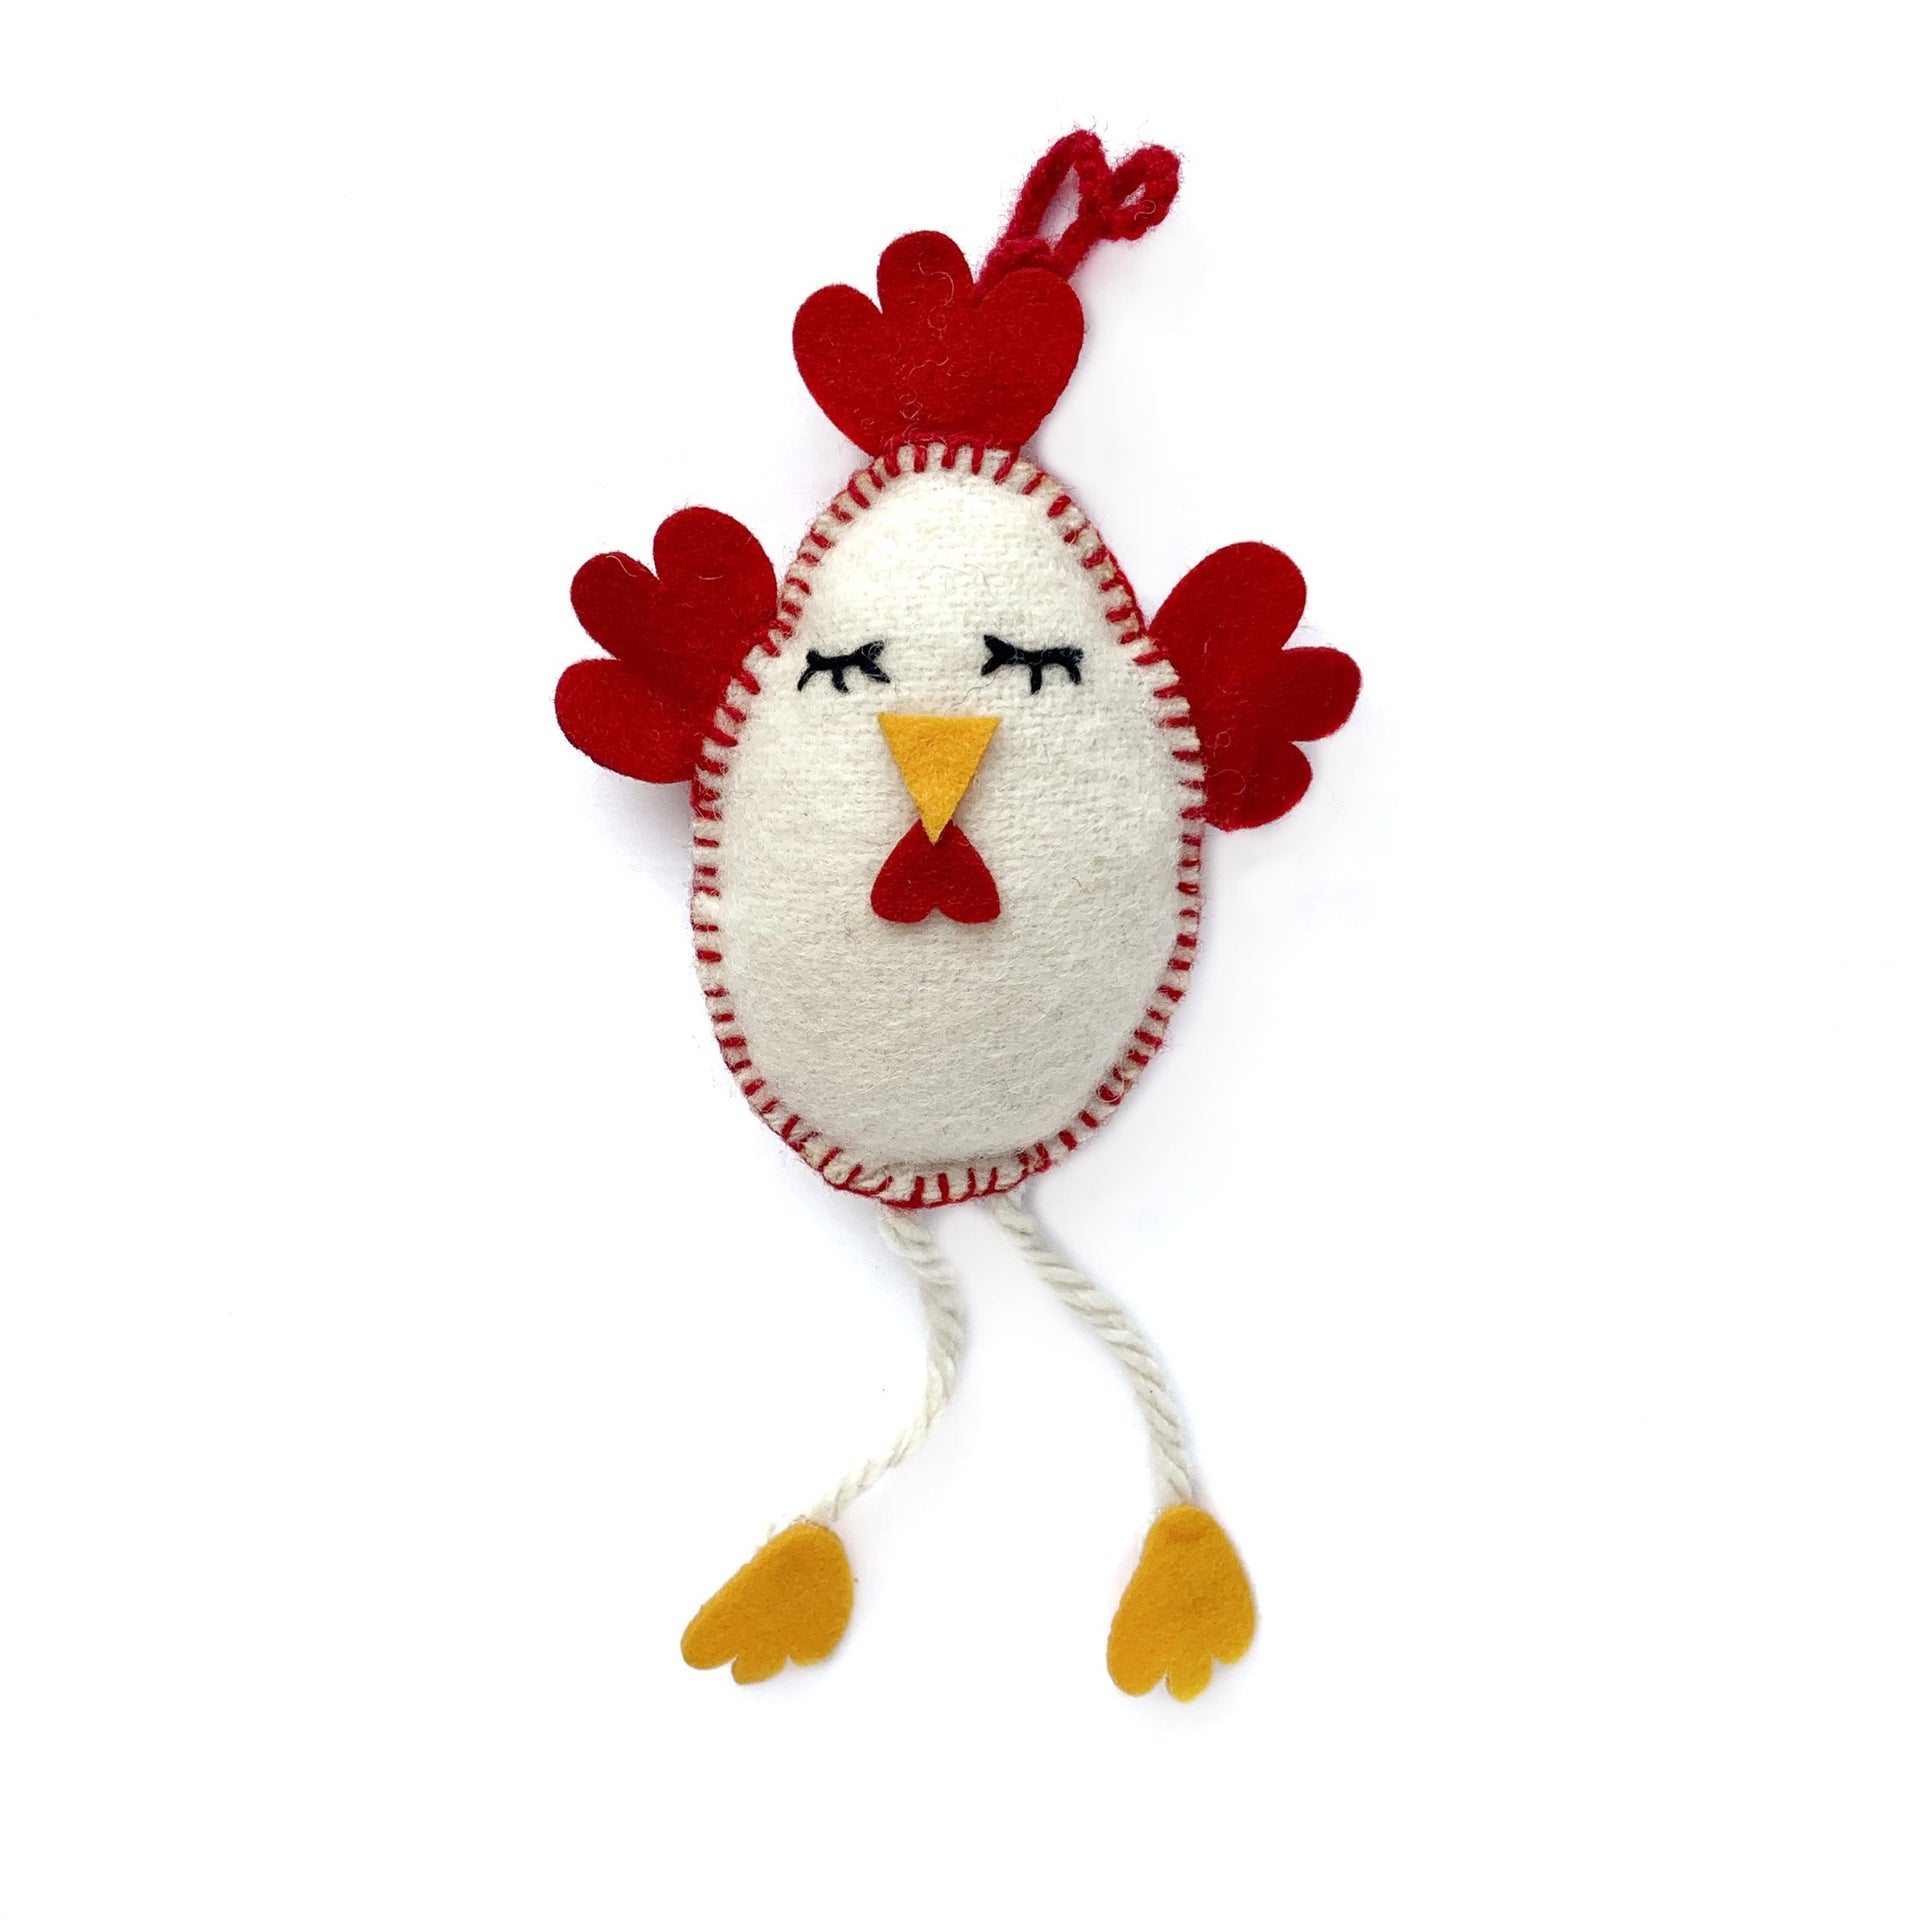 Funny chicken egg Eater ornament with dangle legs